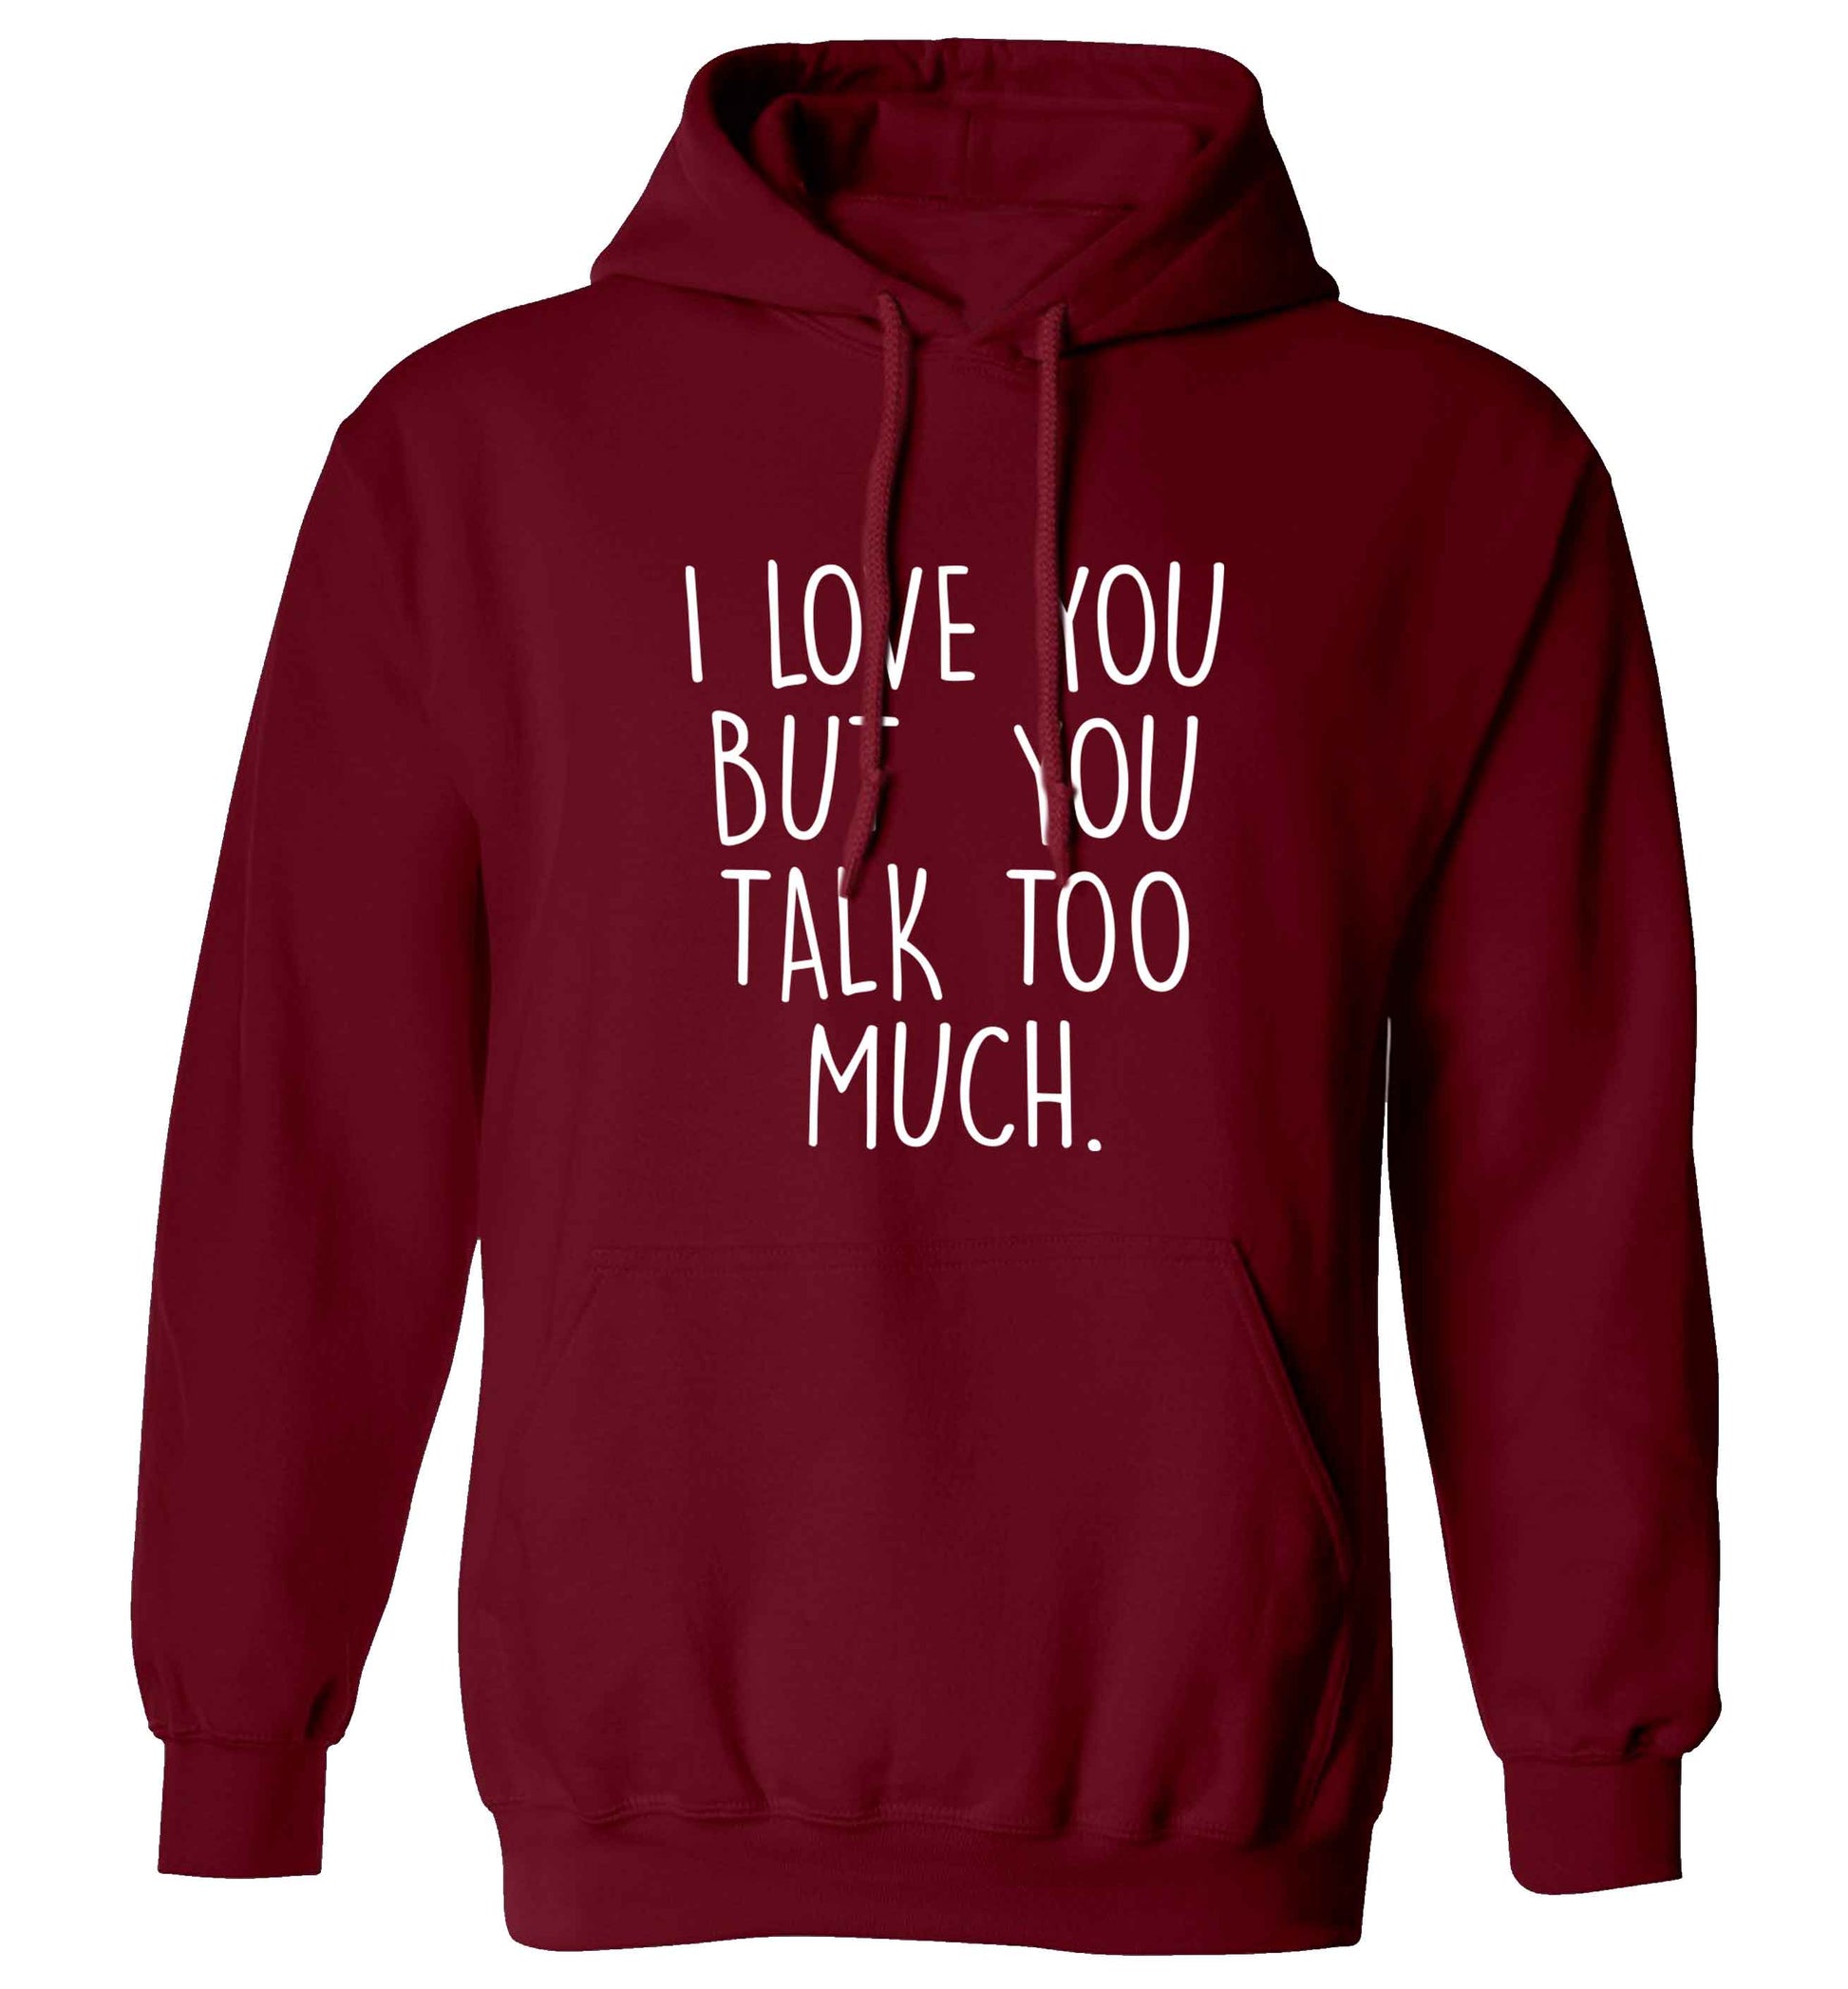 I love you but you talk too much adults unisex maroon hoodie 2XL